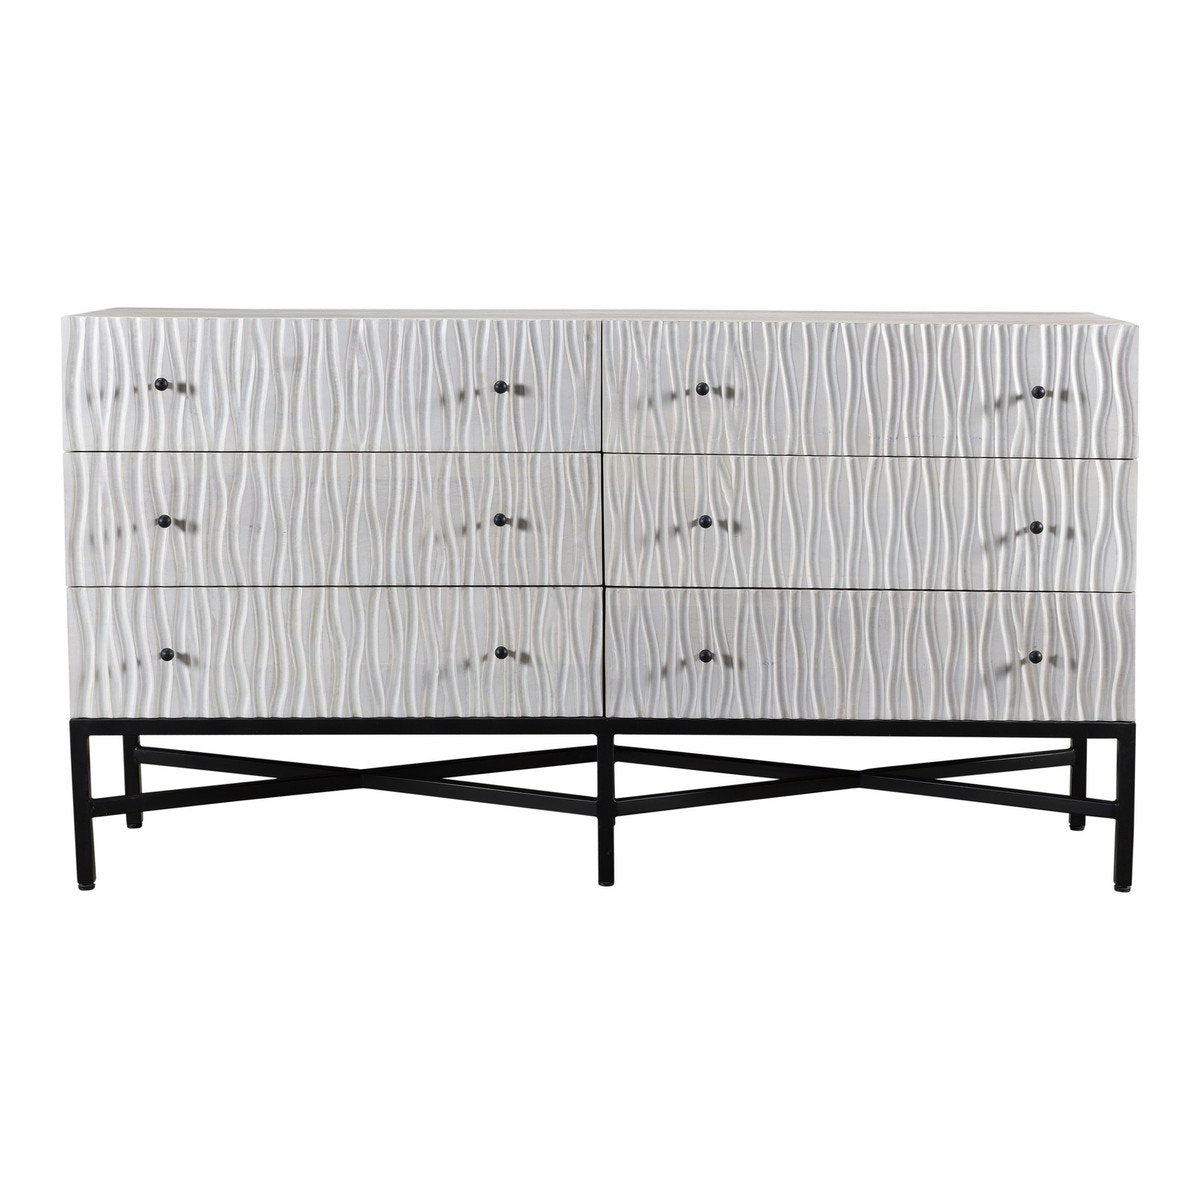 Moe's Home Collection Faceout Dresser - VE-1080-18 - Moe's Home Collection - Dressers - Minimal And Modern - 1